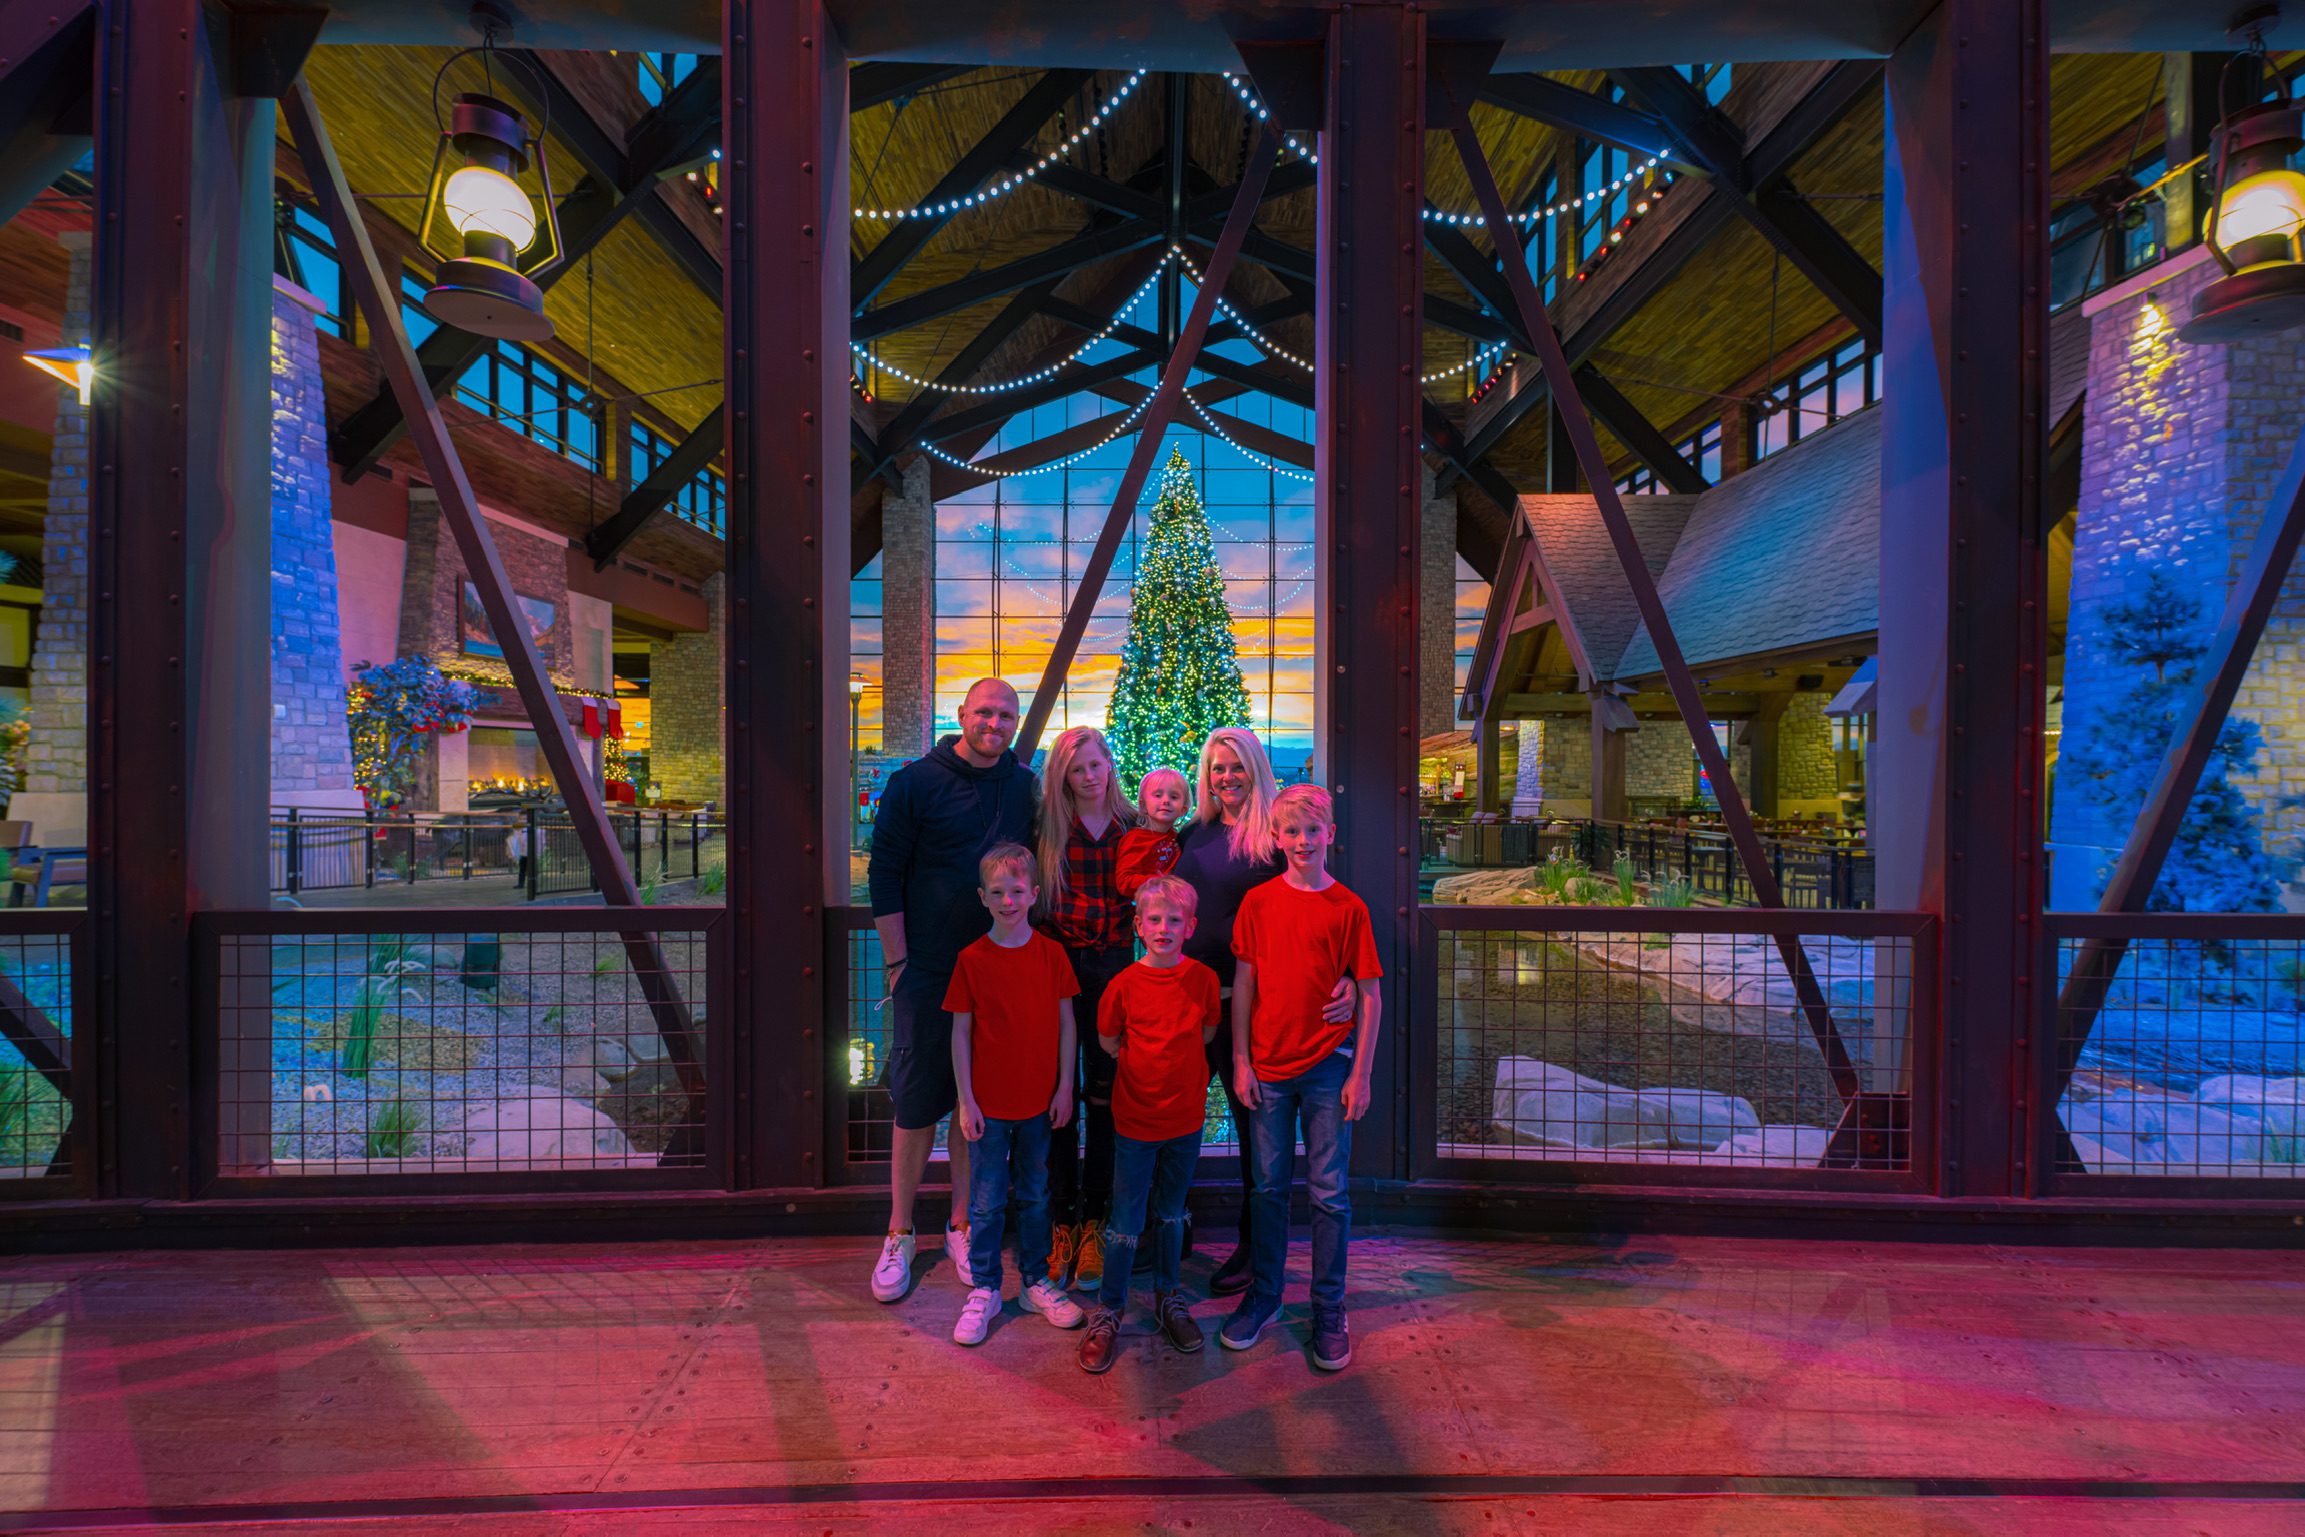 https://7wayfinders.com/wp-content/uploads/2021/12/christmas-staycation-with-kids-at-gaylord-of-the-rockies.jpg